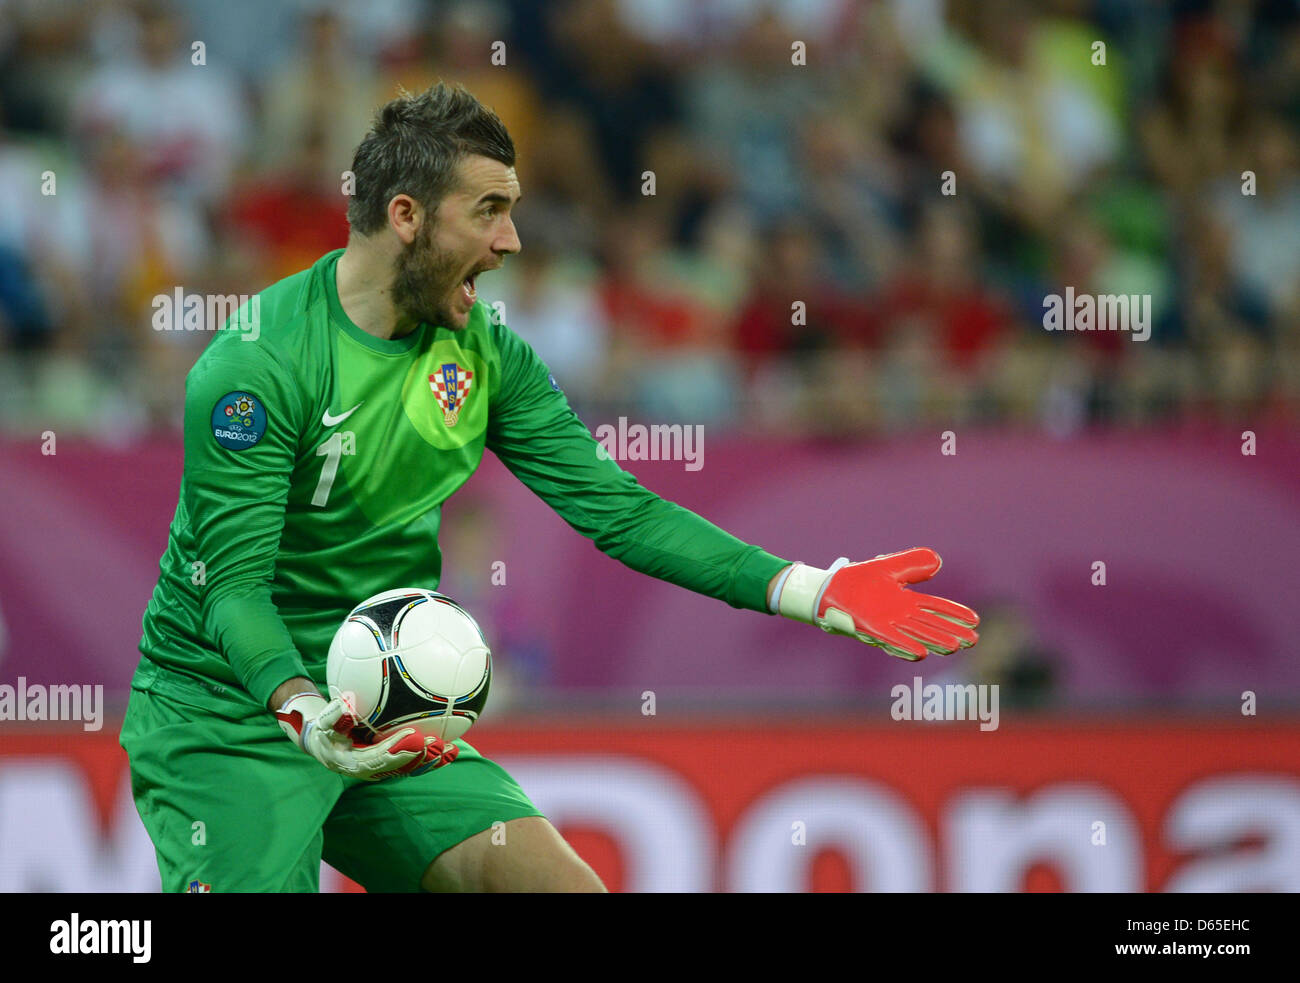 Croatia's goalkeeper Stipe Pletikosa gestures during UEFA EURO 2012 group C soccer match Croatia vs Spain at Arena Gdansk in Gdansk, Poland, 18 June 2012. Photo: Marcus Brandt dpa (Please refer to chapters 7 and 8 of http://dpaq.de/Ziovh for UEFA Euro 2012 Terms & Conditions)  +++(c) dpa - Bildfunk+++ Stock Photo